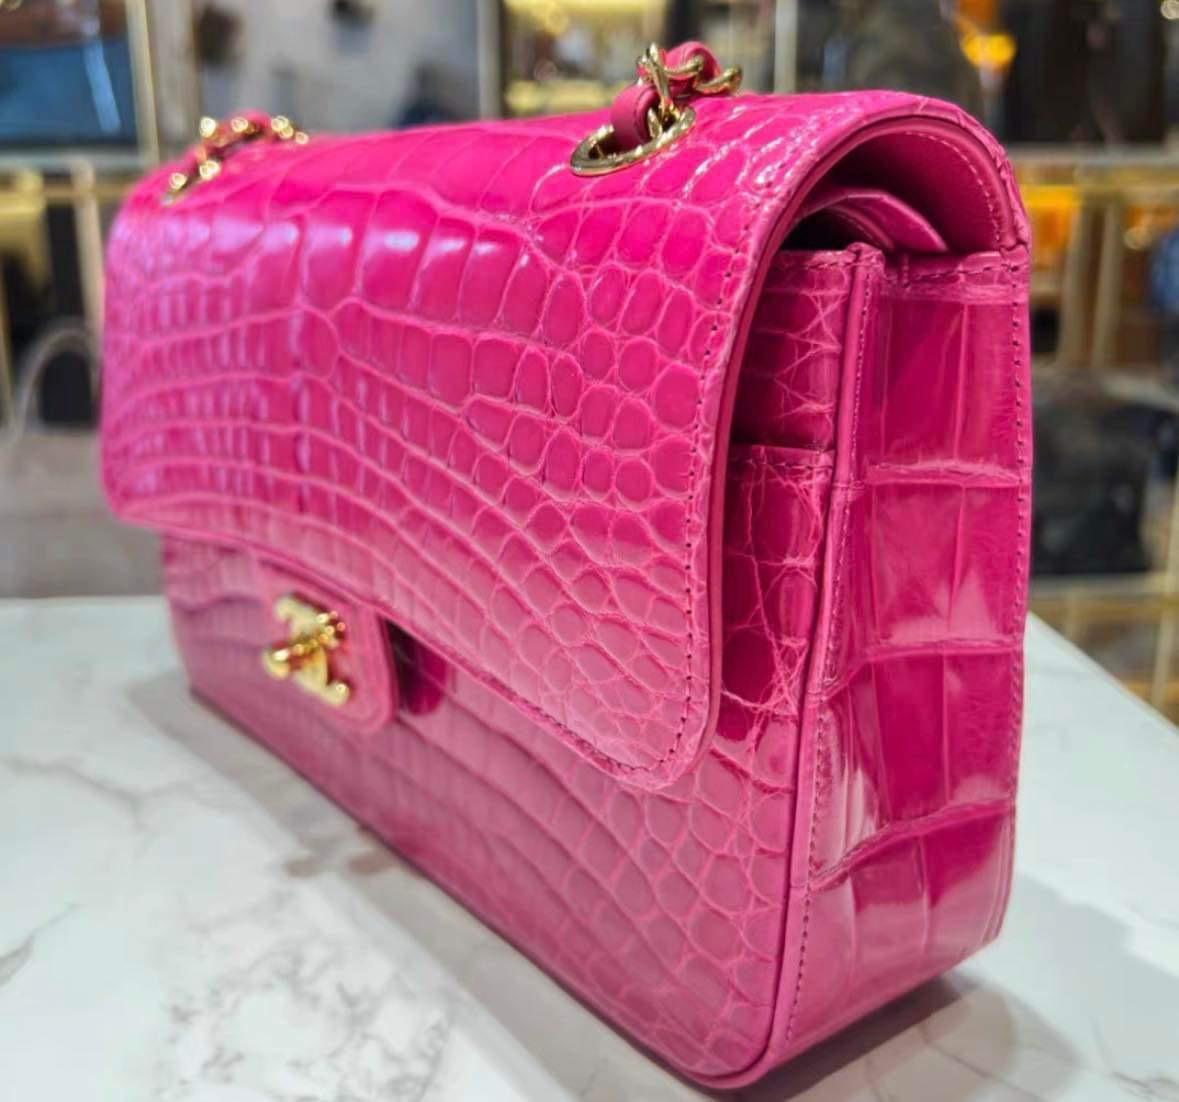 Chanel Hot Pink Shiny Alligator Jumbo Double Flap Bag with Gold Hardware en vente 14